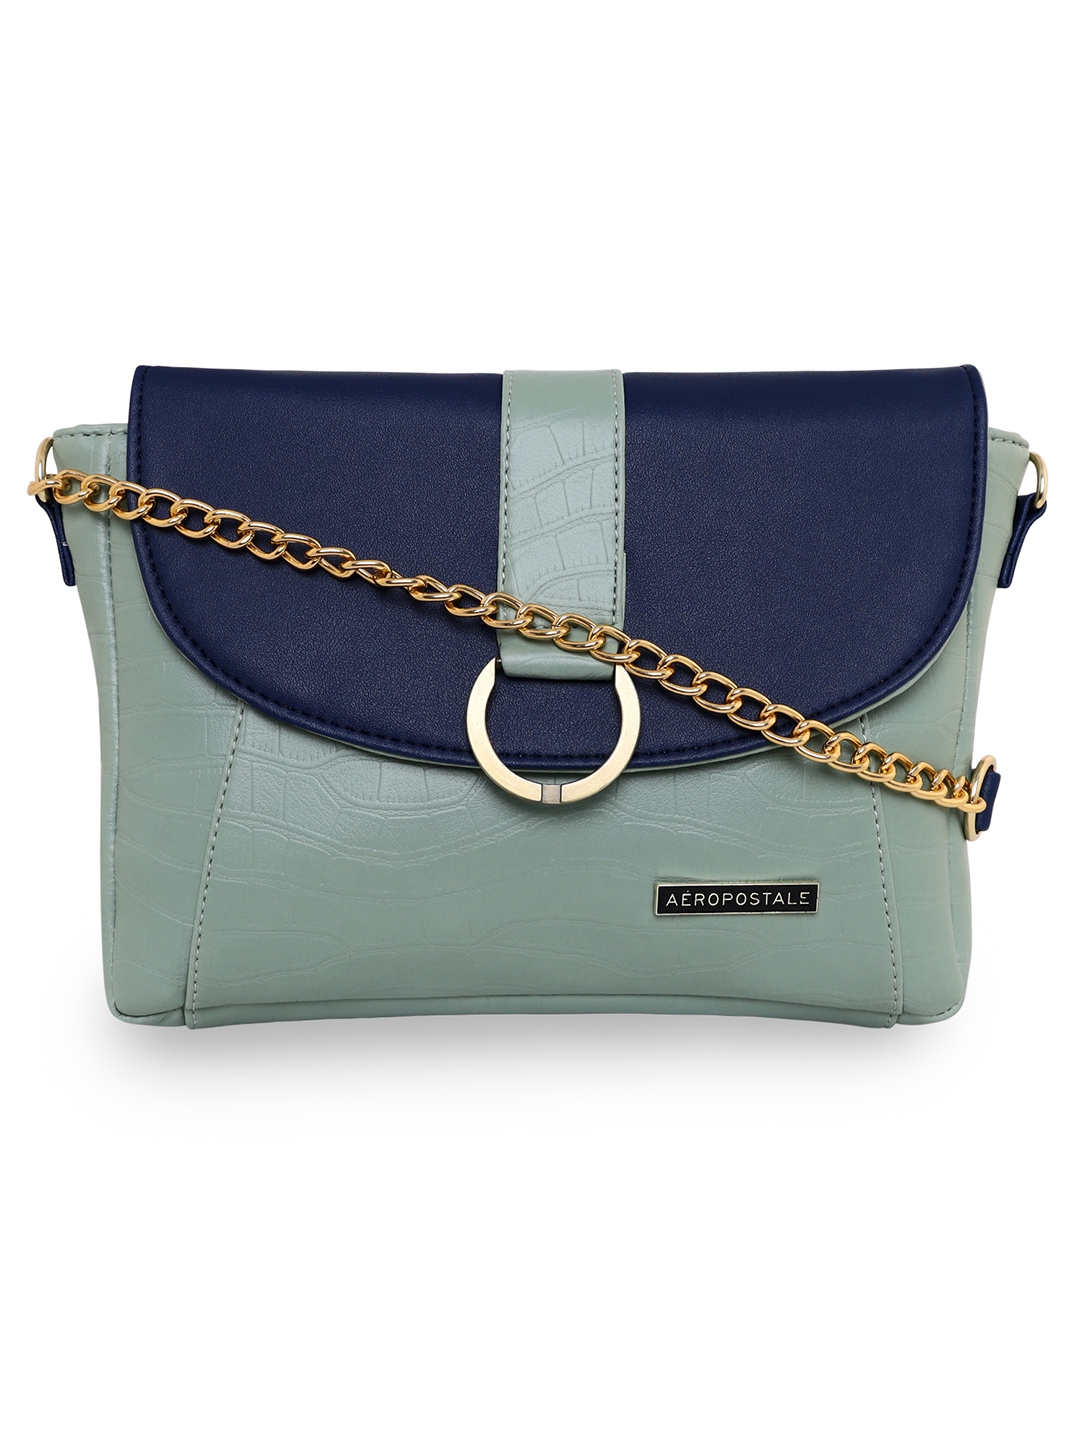 Aeropostale | Aeropostale Textured Amy Crossbody Fashion Bags For Women Stylish Magnetic Flap Button With Fancy Handware Vegan Leather Green